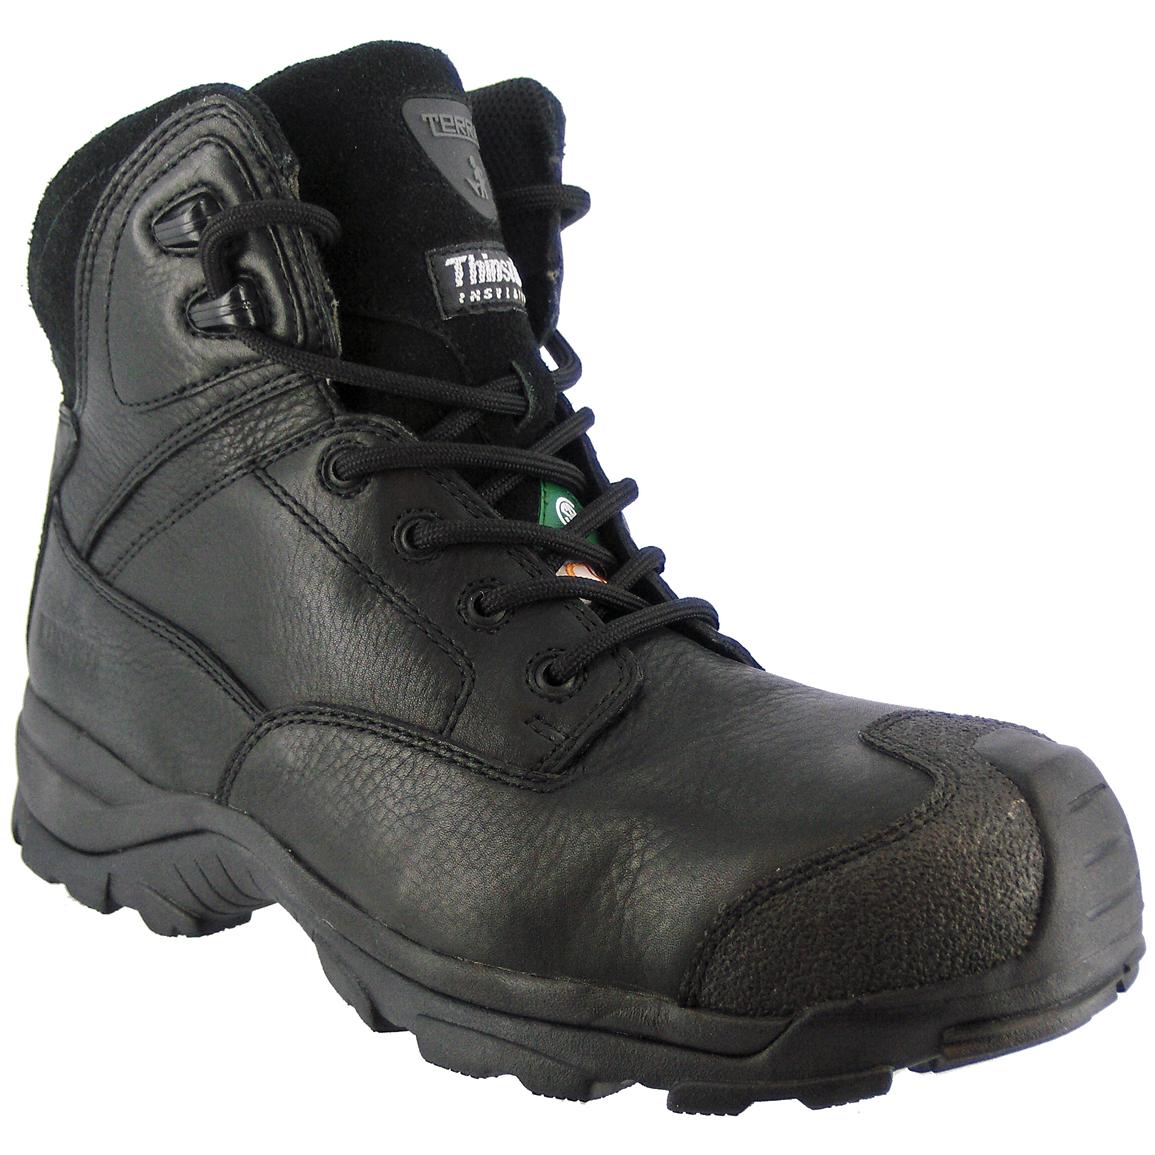 1 gram insulated work boots composite toe